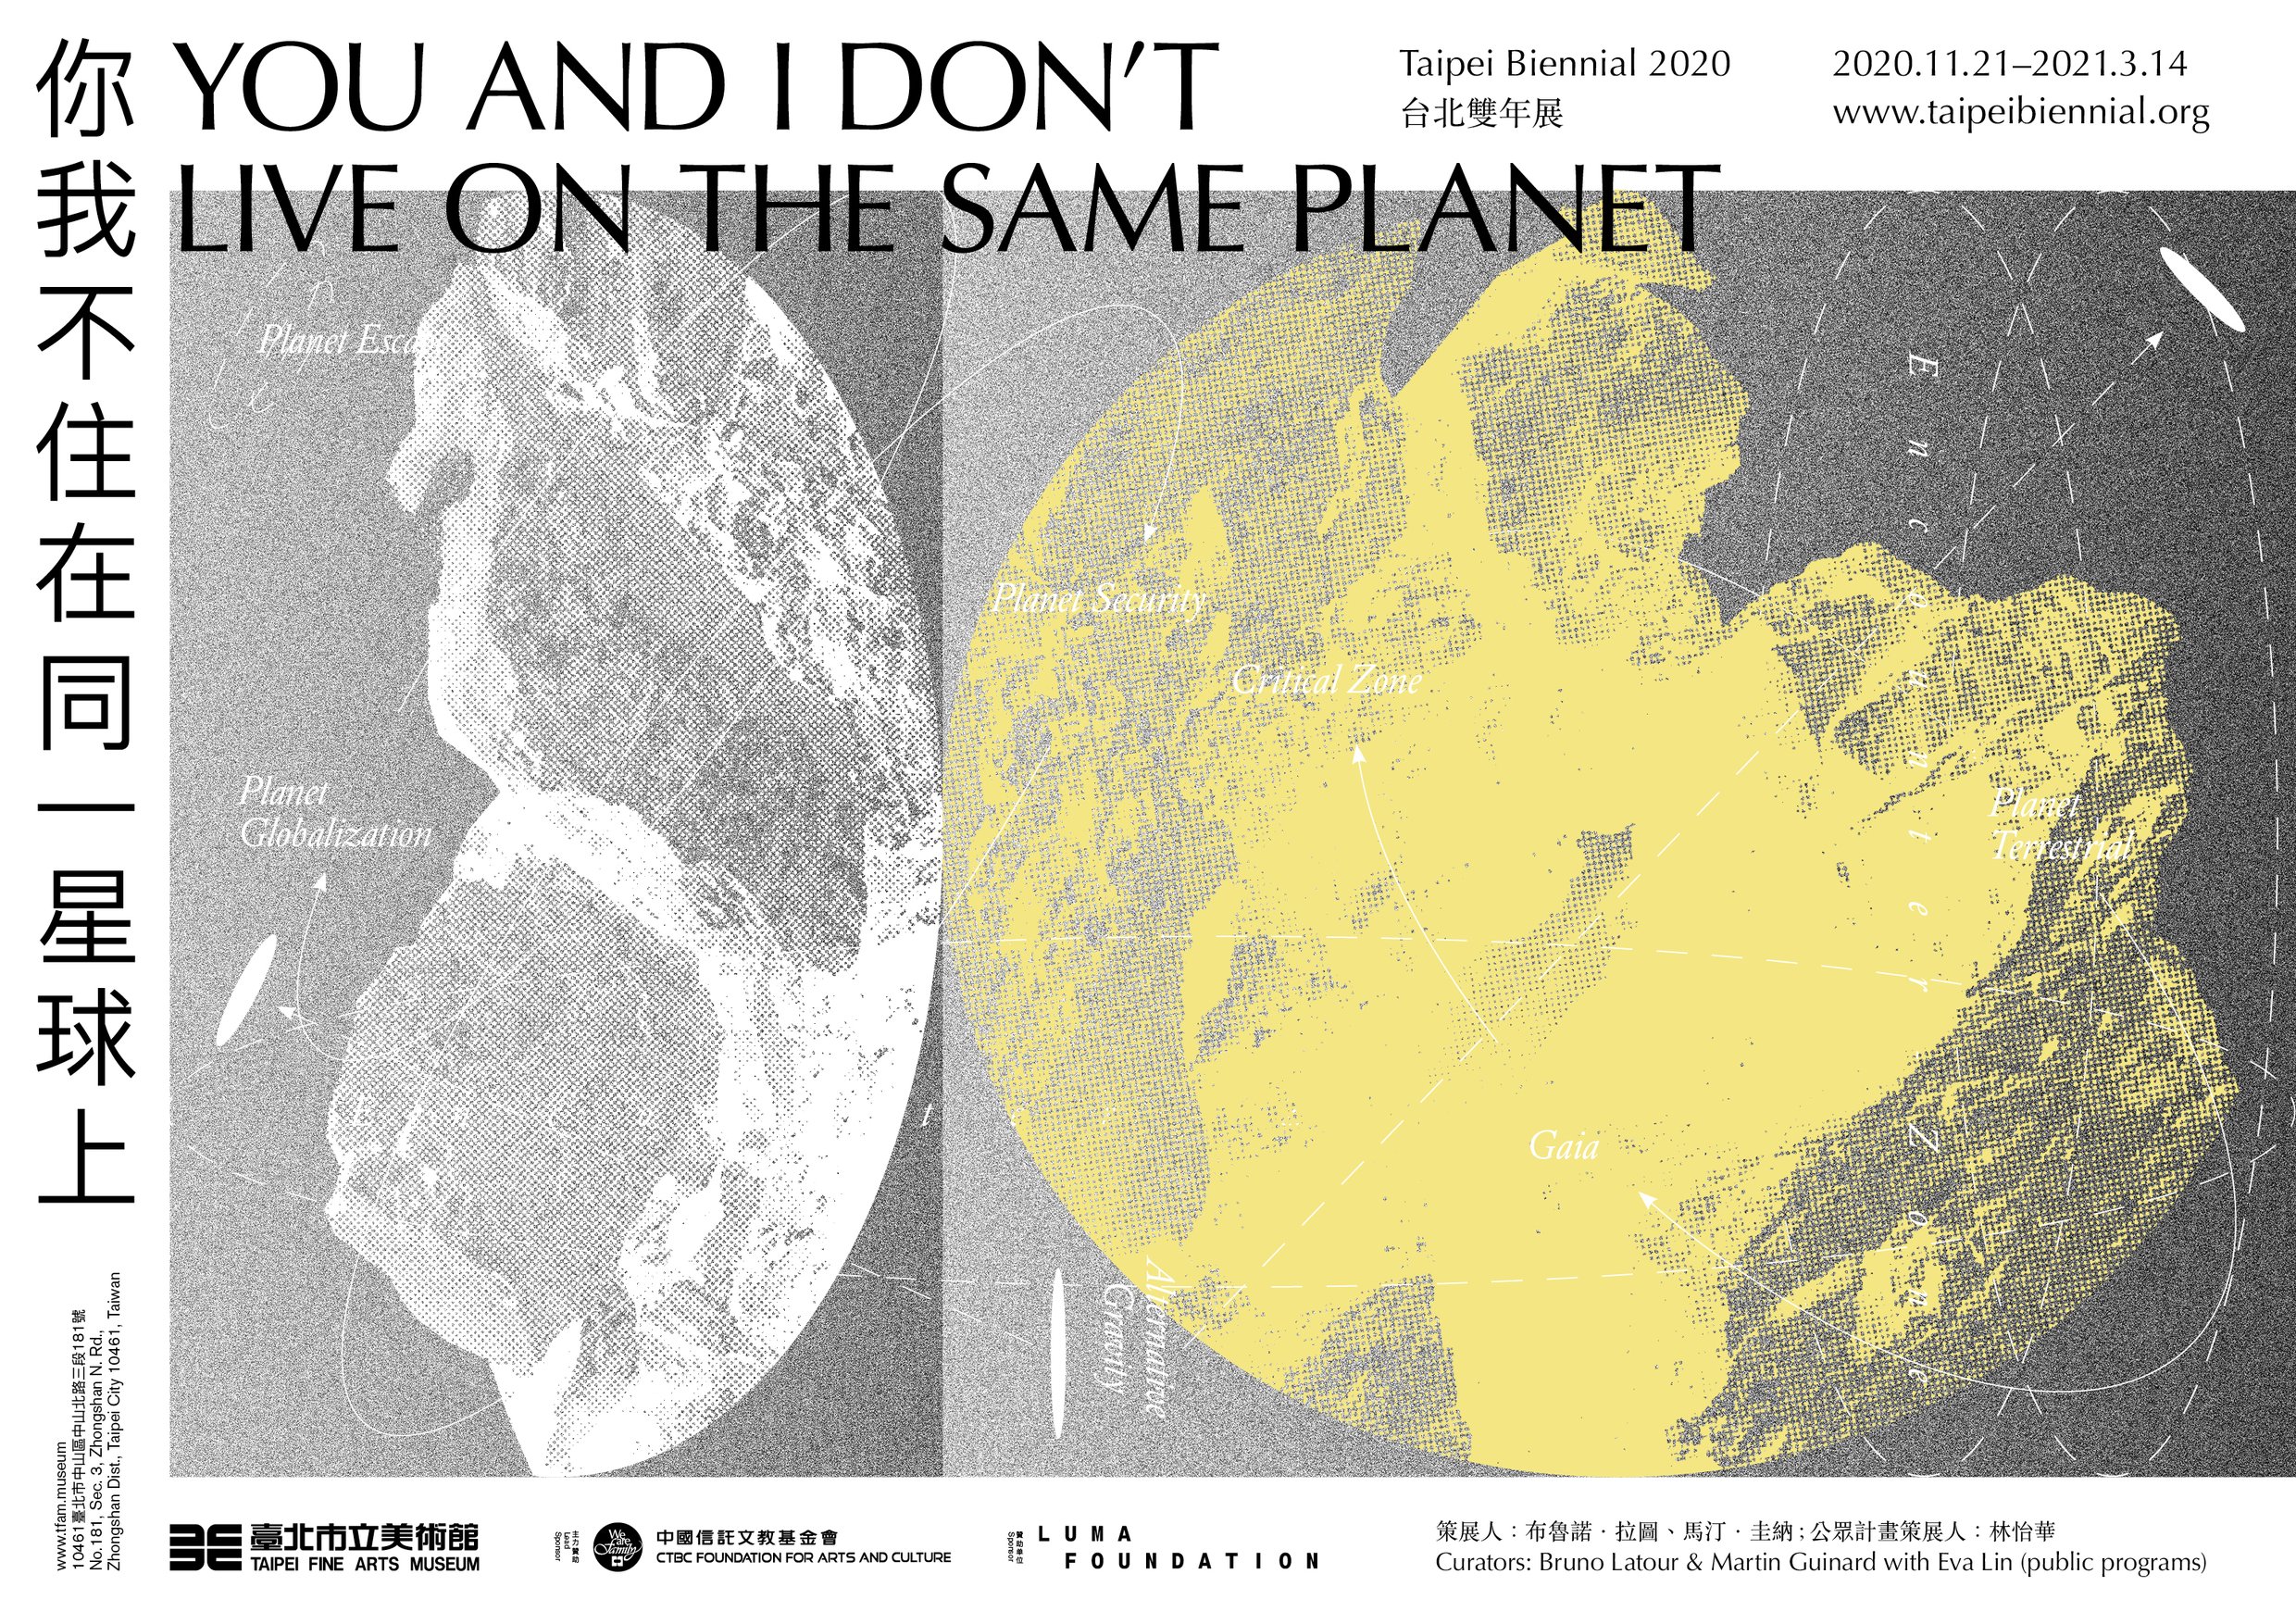 1_Taipei Biennial 2020, You and I Don’t Live on the Same Planet-1.jpg